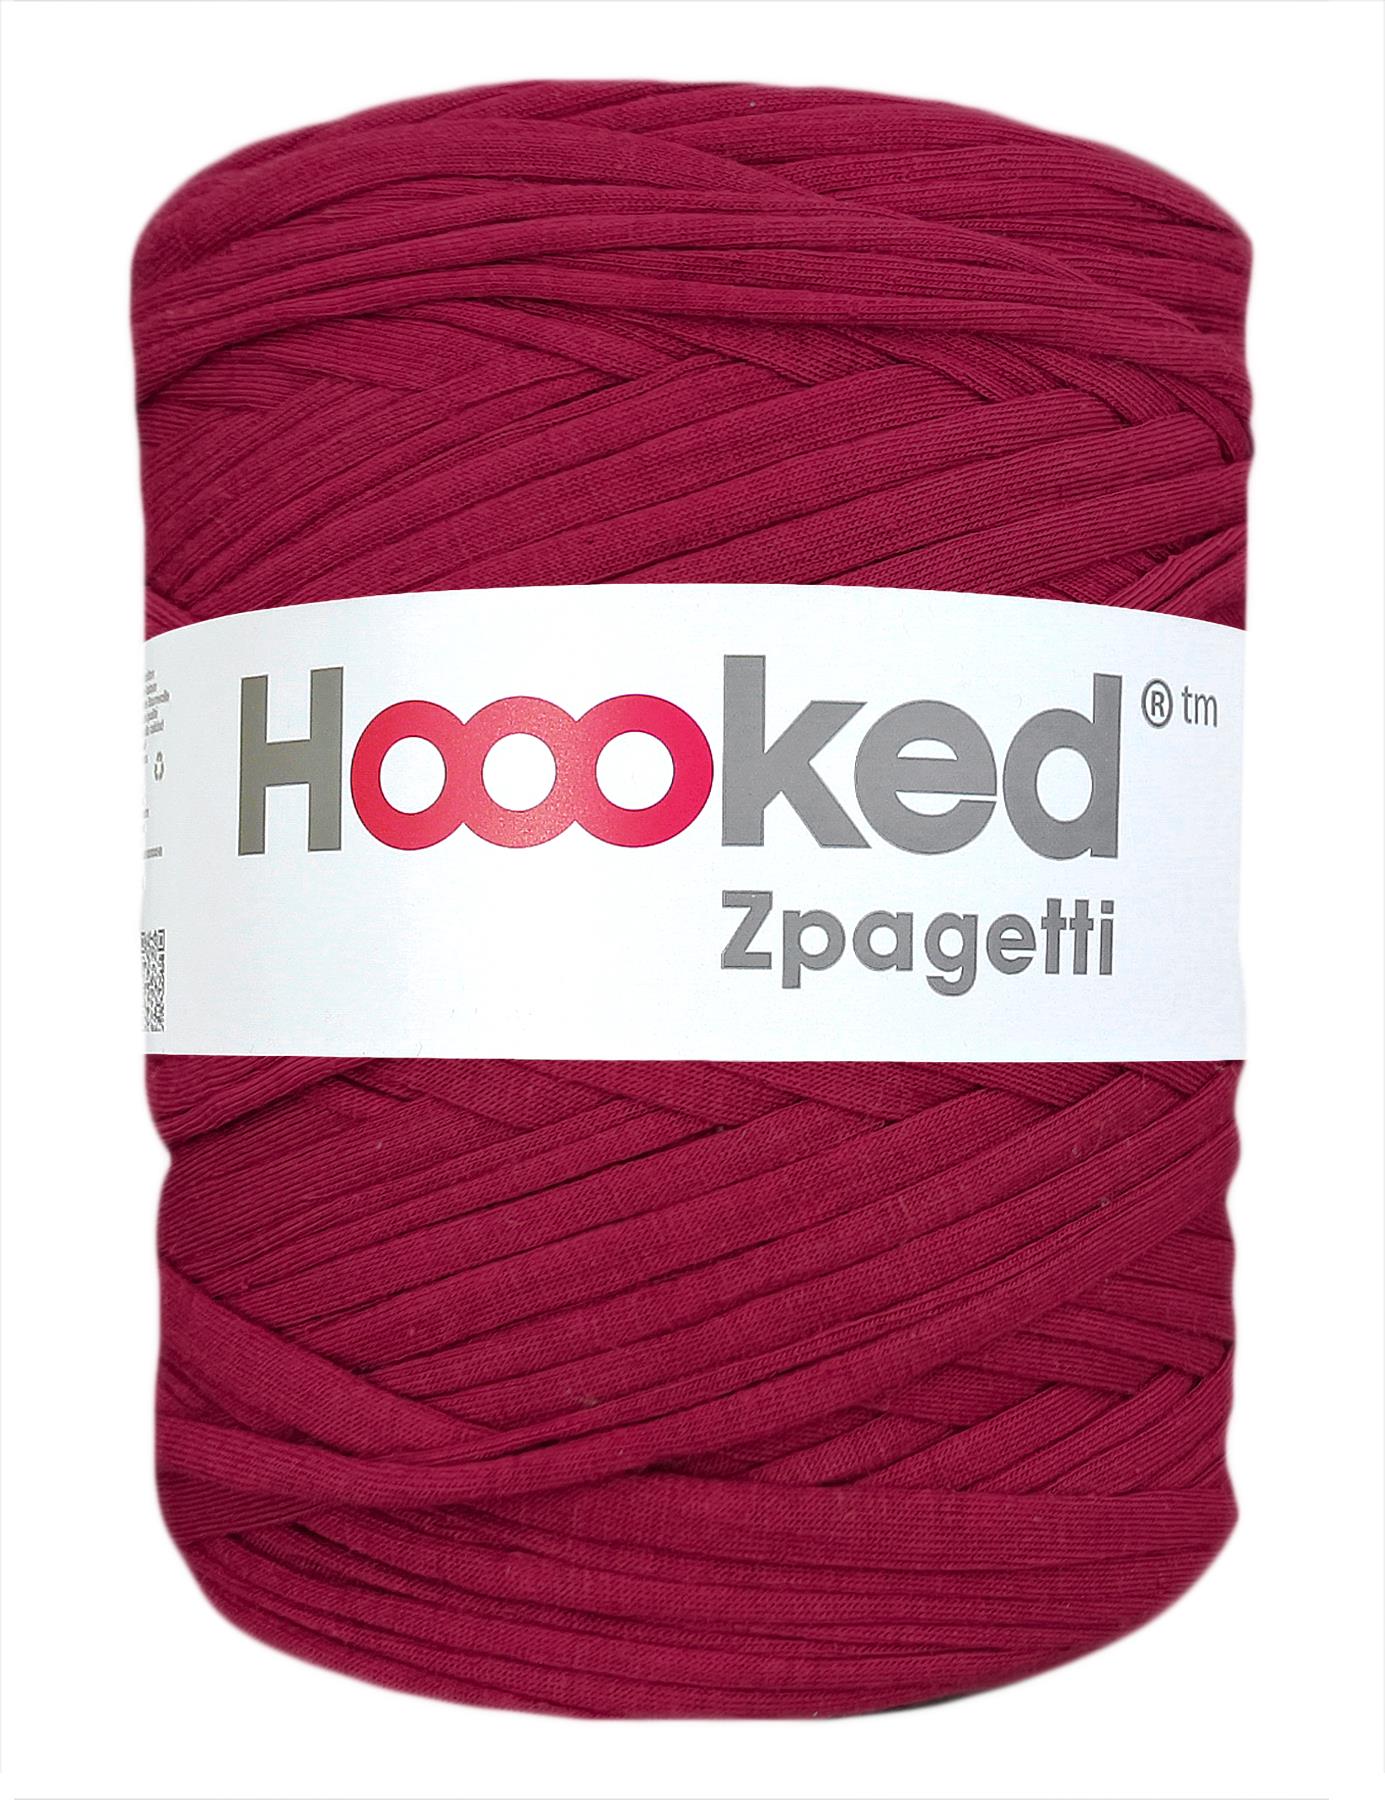 Bright burgundy red t-shirt yarn by Hoooked Zpagetti (100-120m)